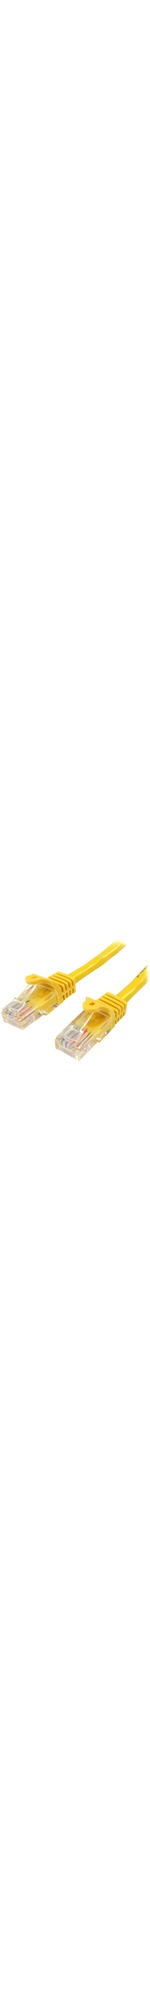 StarTech.com 1m Yellow Cat5e Snagless RJ45 UTP Patch Cable - 1m Patch Cord - 1 x RJ-45 Male Network